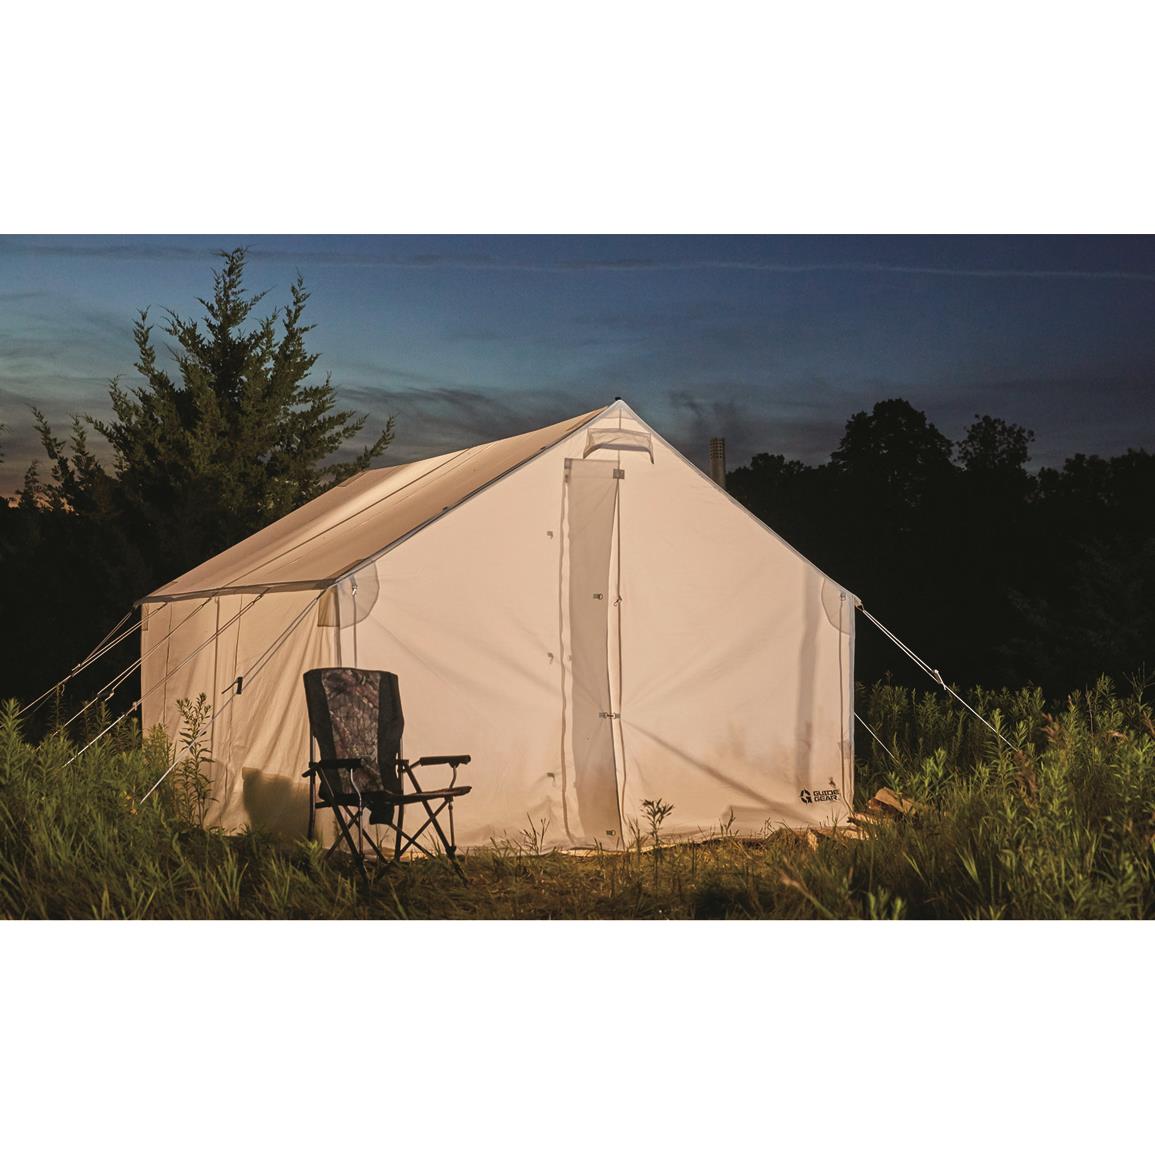 Guide Gear 10x12' Canvas Wall Tent and Aluminum Frame